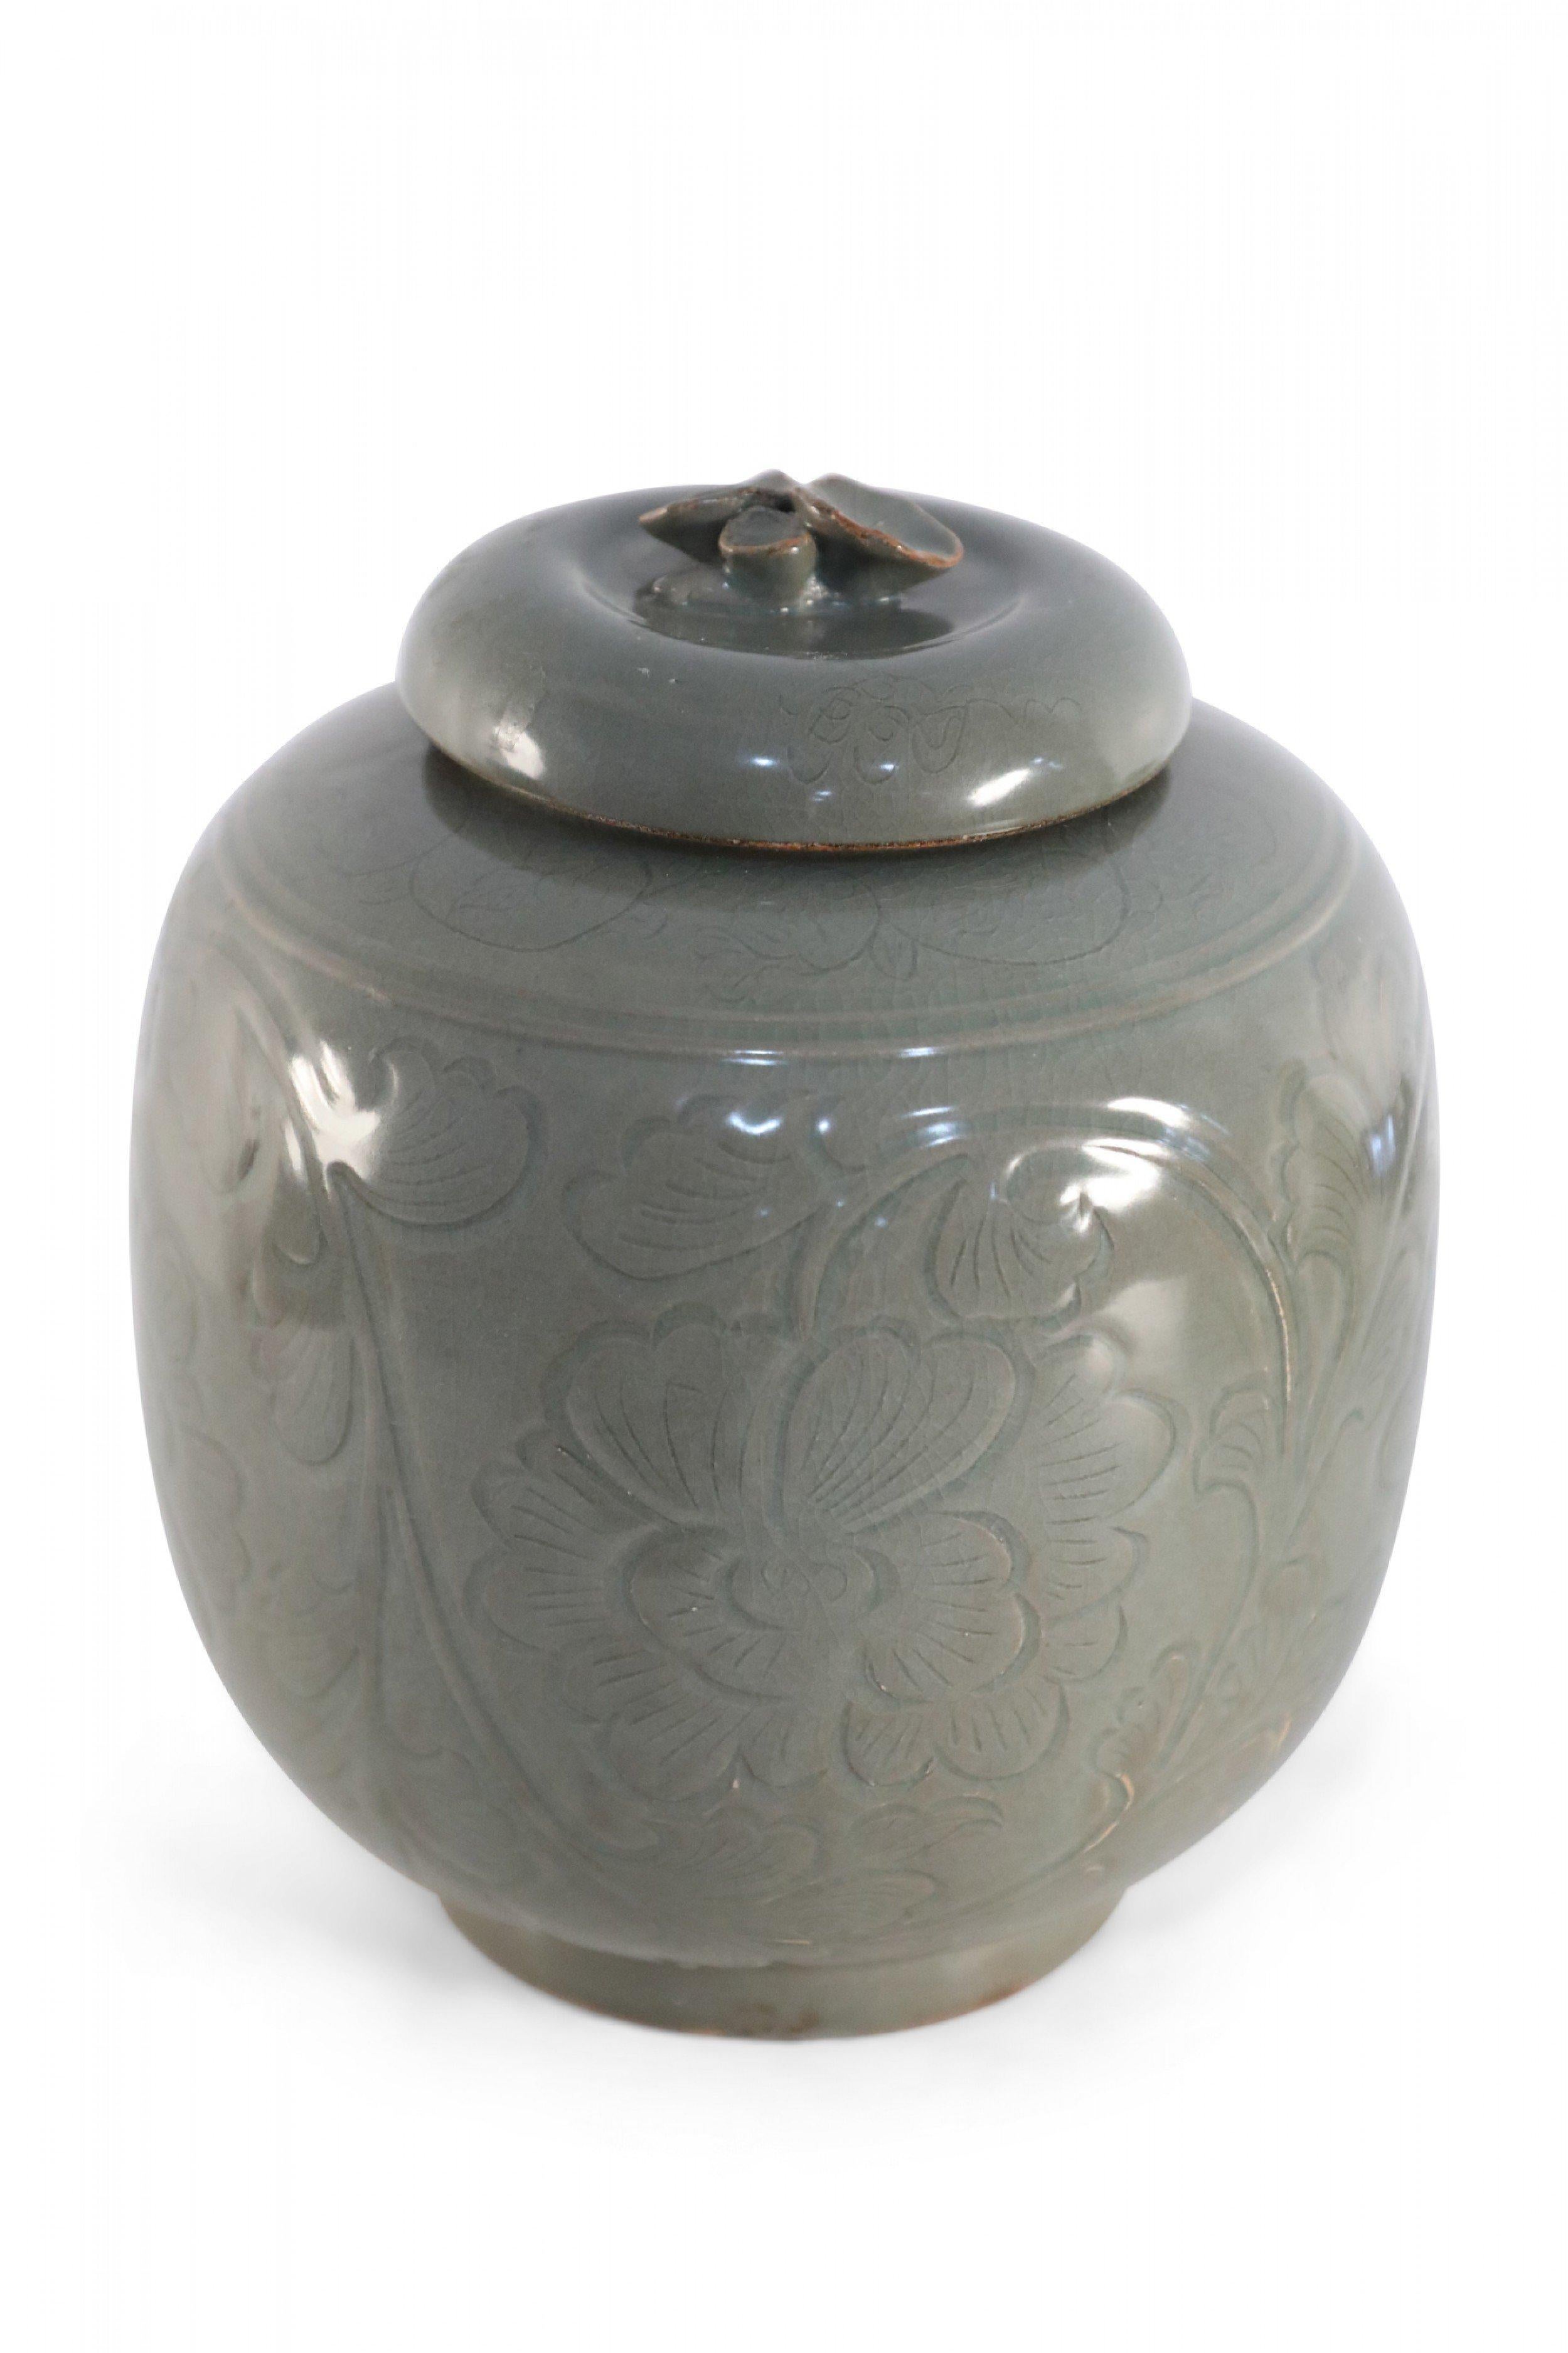 Chinese sage-colored, lidded porcelain jar crafted in the style of the Song dynasty with a round form decorated in a raised, tonal botanical pattern.